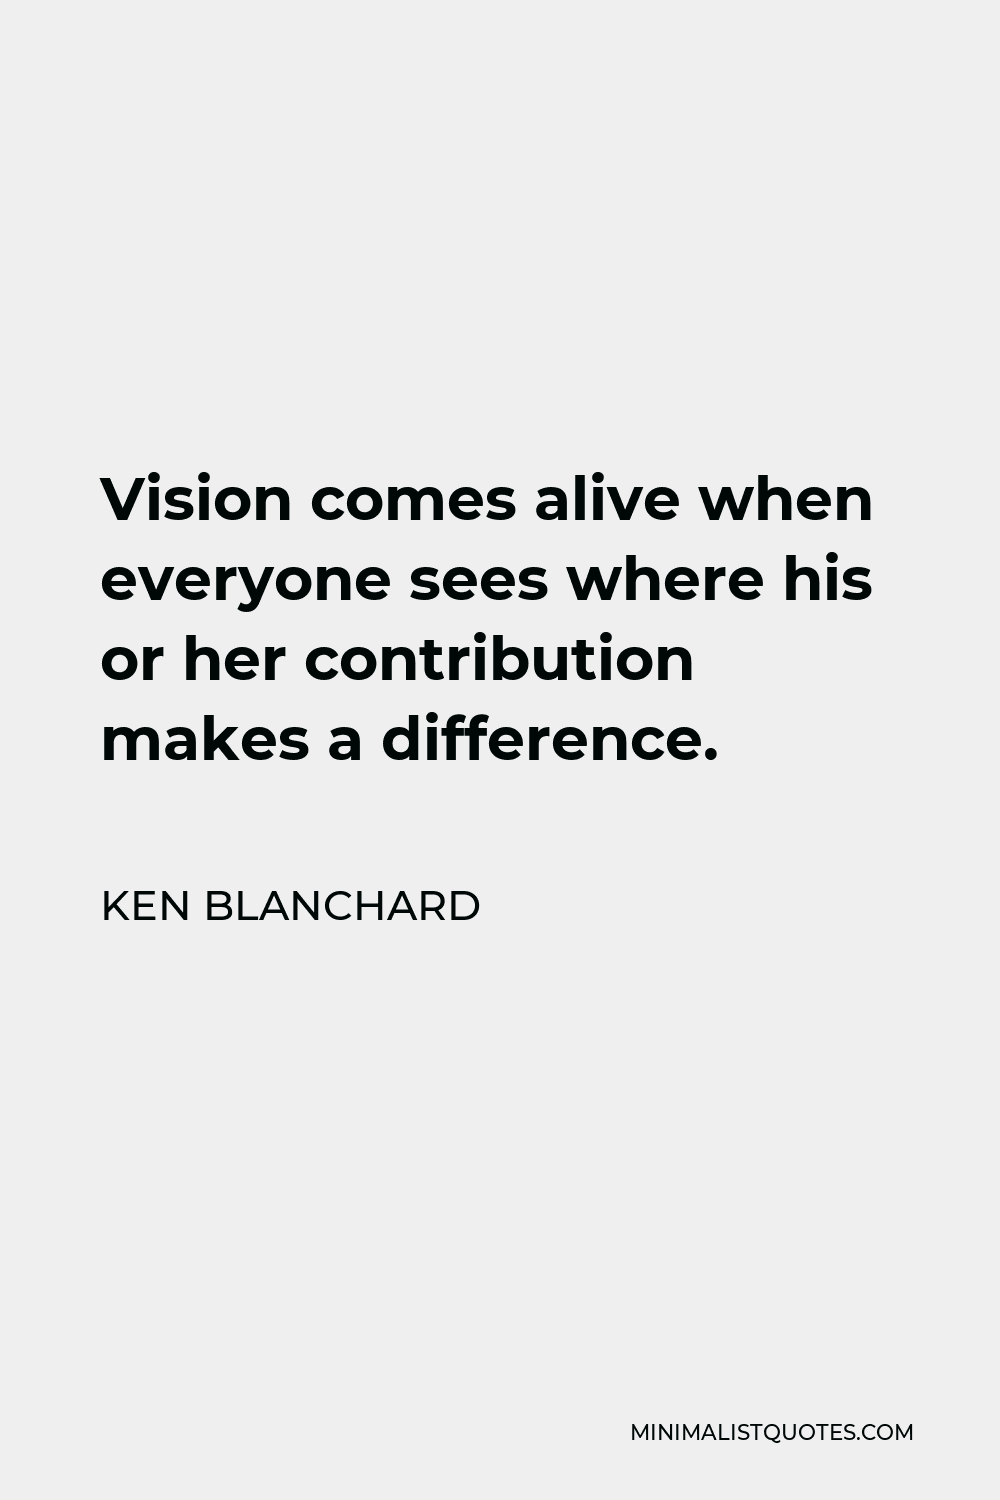 Ken Blanchard Quote - Vision comes alive when everyone sees where his or her contribution makes a difference.